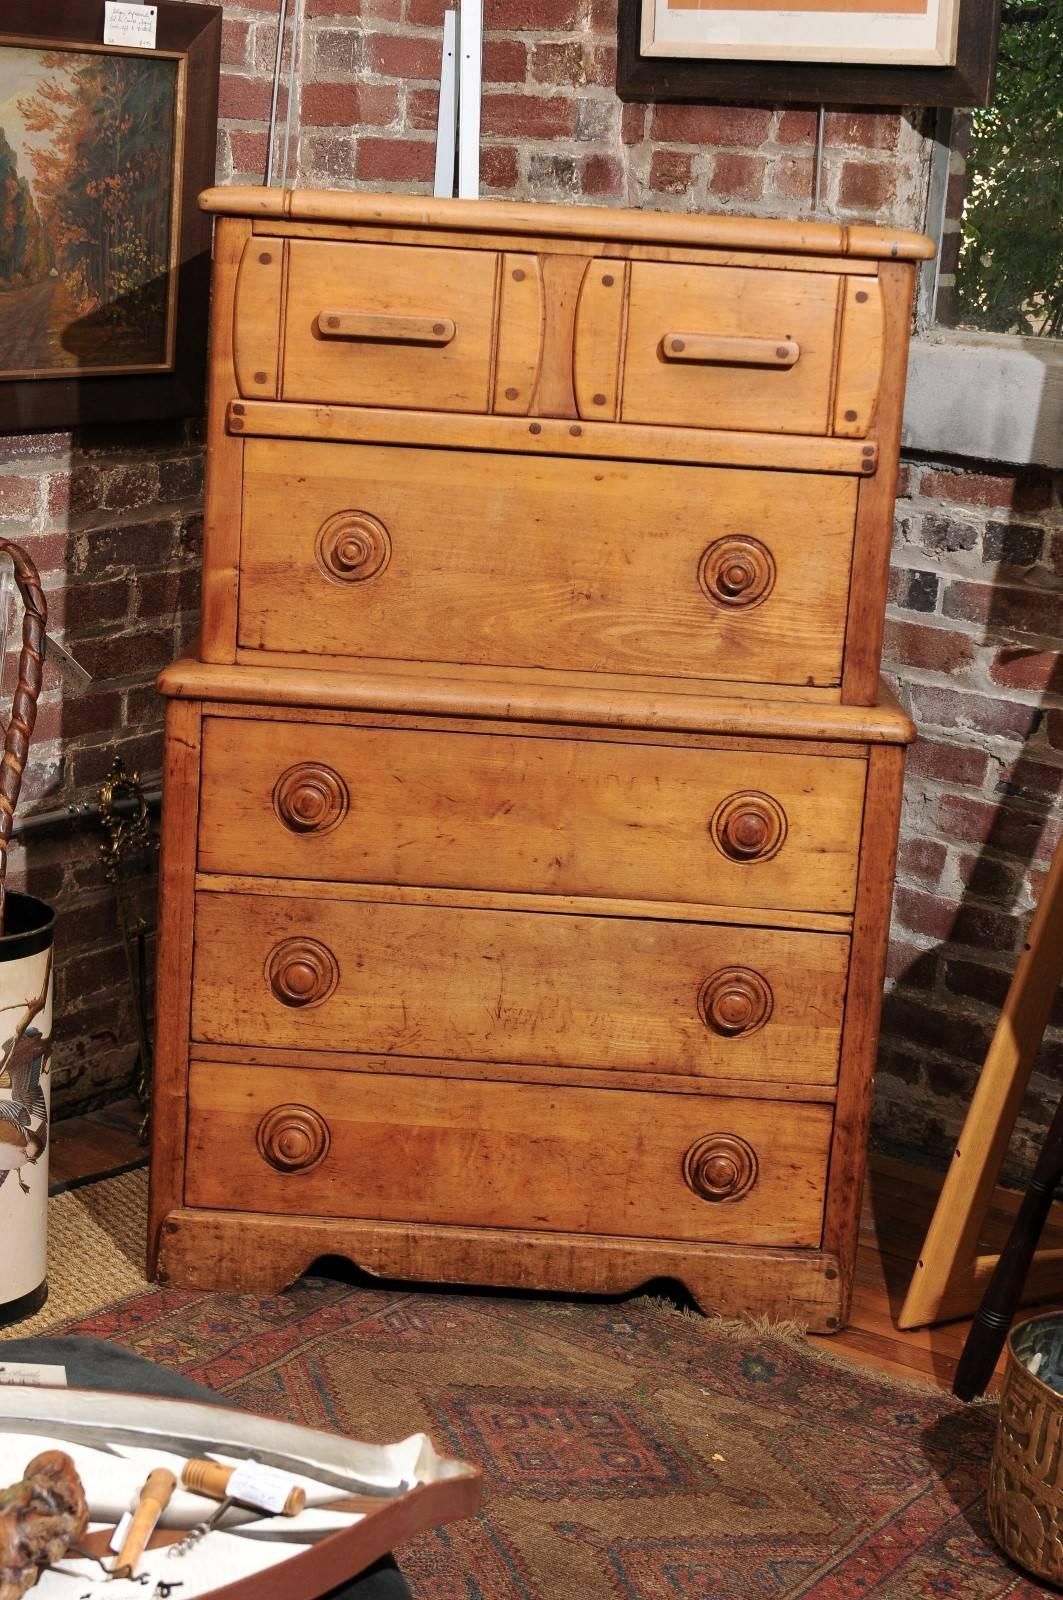 19th century English secretaire of solid pine with two upper drawers over a fitted slide out fall front desk. The case holds three more drawers below. When open, the secretaire measures 30.5